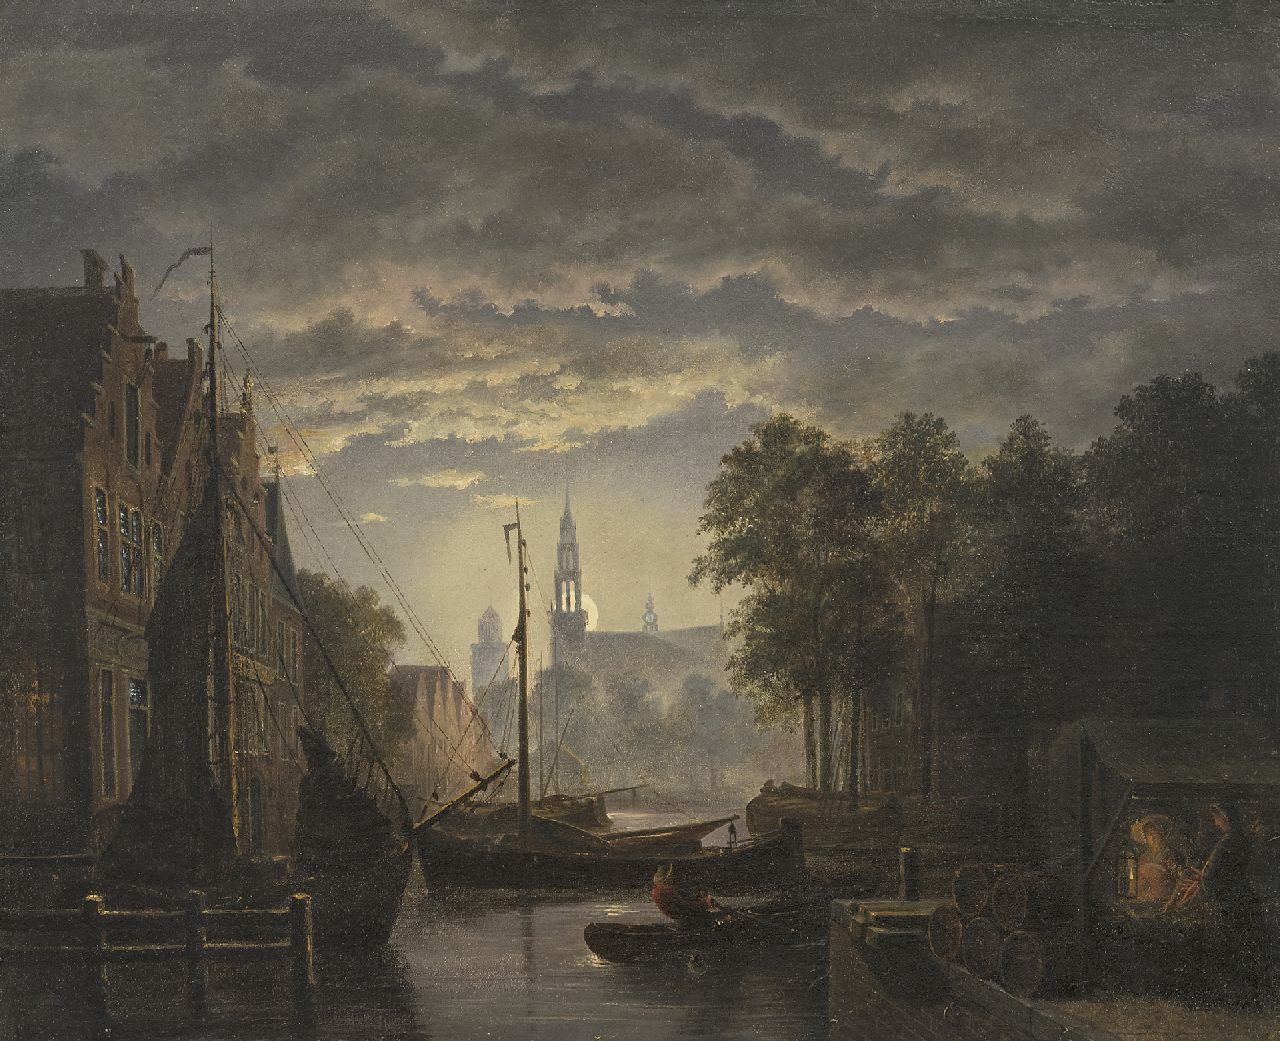 Abels J.Th.  | 'Jacobus' Theodorus Abels, A harbor in a town by moonlight, oil on canvas 33.4 x 40.4 cm